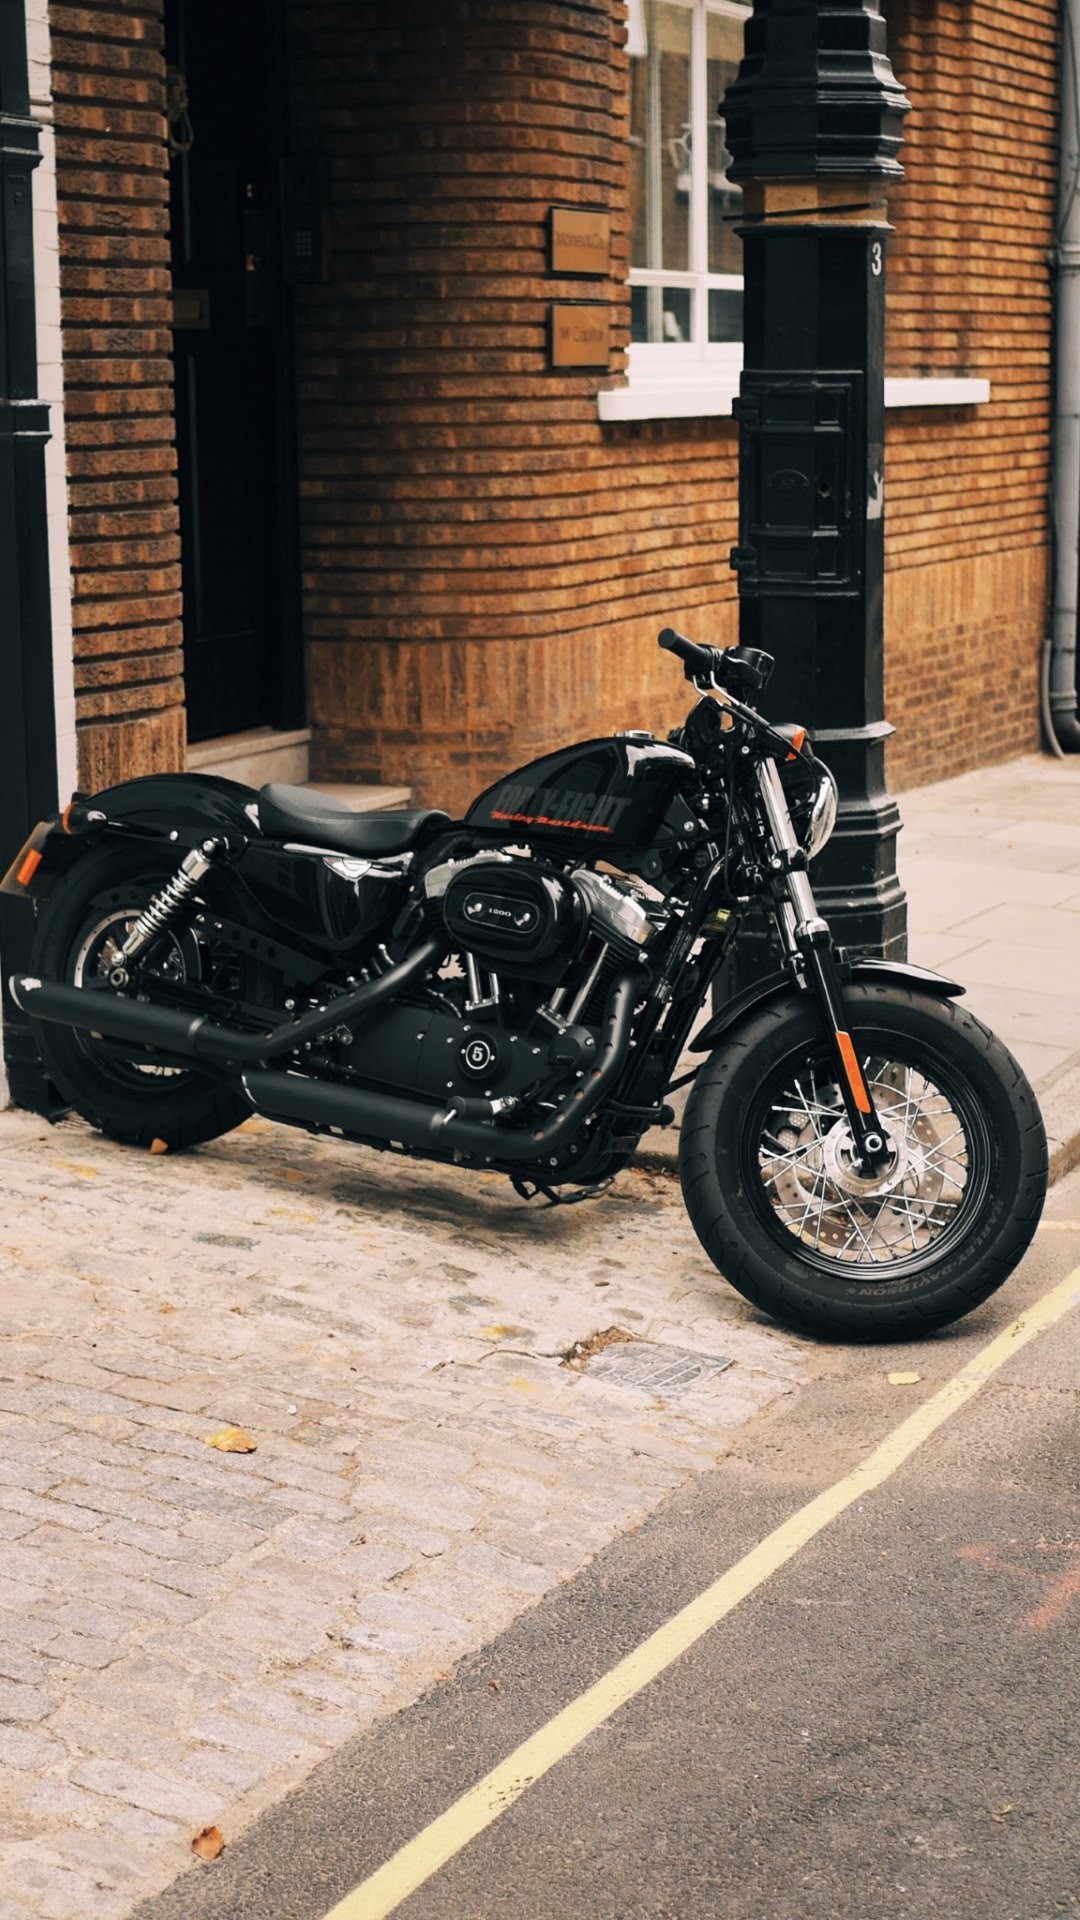 1080x1920 Harley Davidson on London streets Wallpapers :: HD Wallpapers